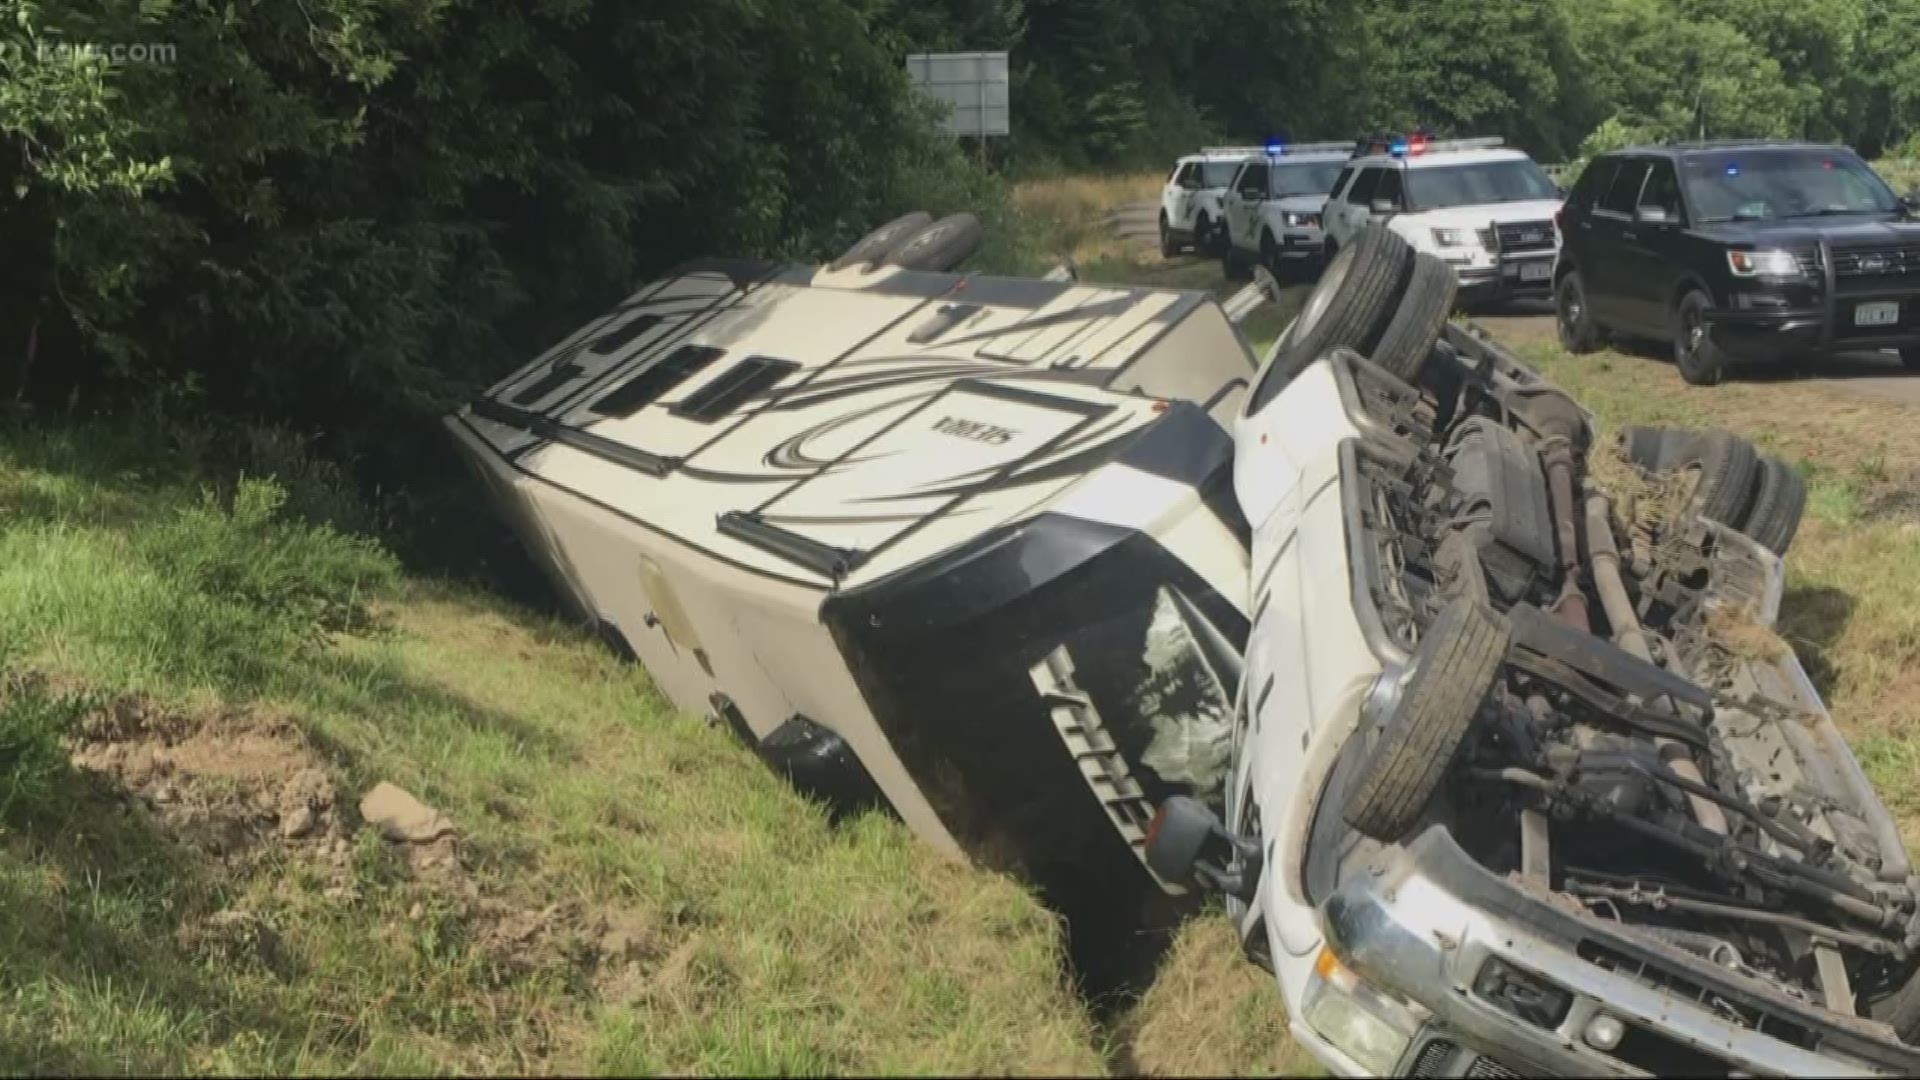 A Washington State Patrol trooper went above and beyond the call of duty to help a German family of six after the truck they were using on a cross-country road trip was totaled.